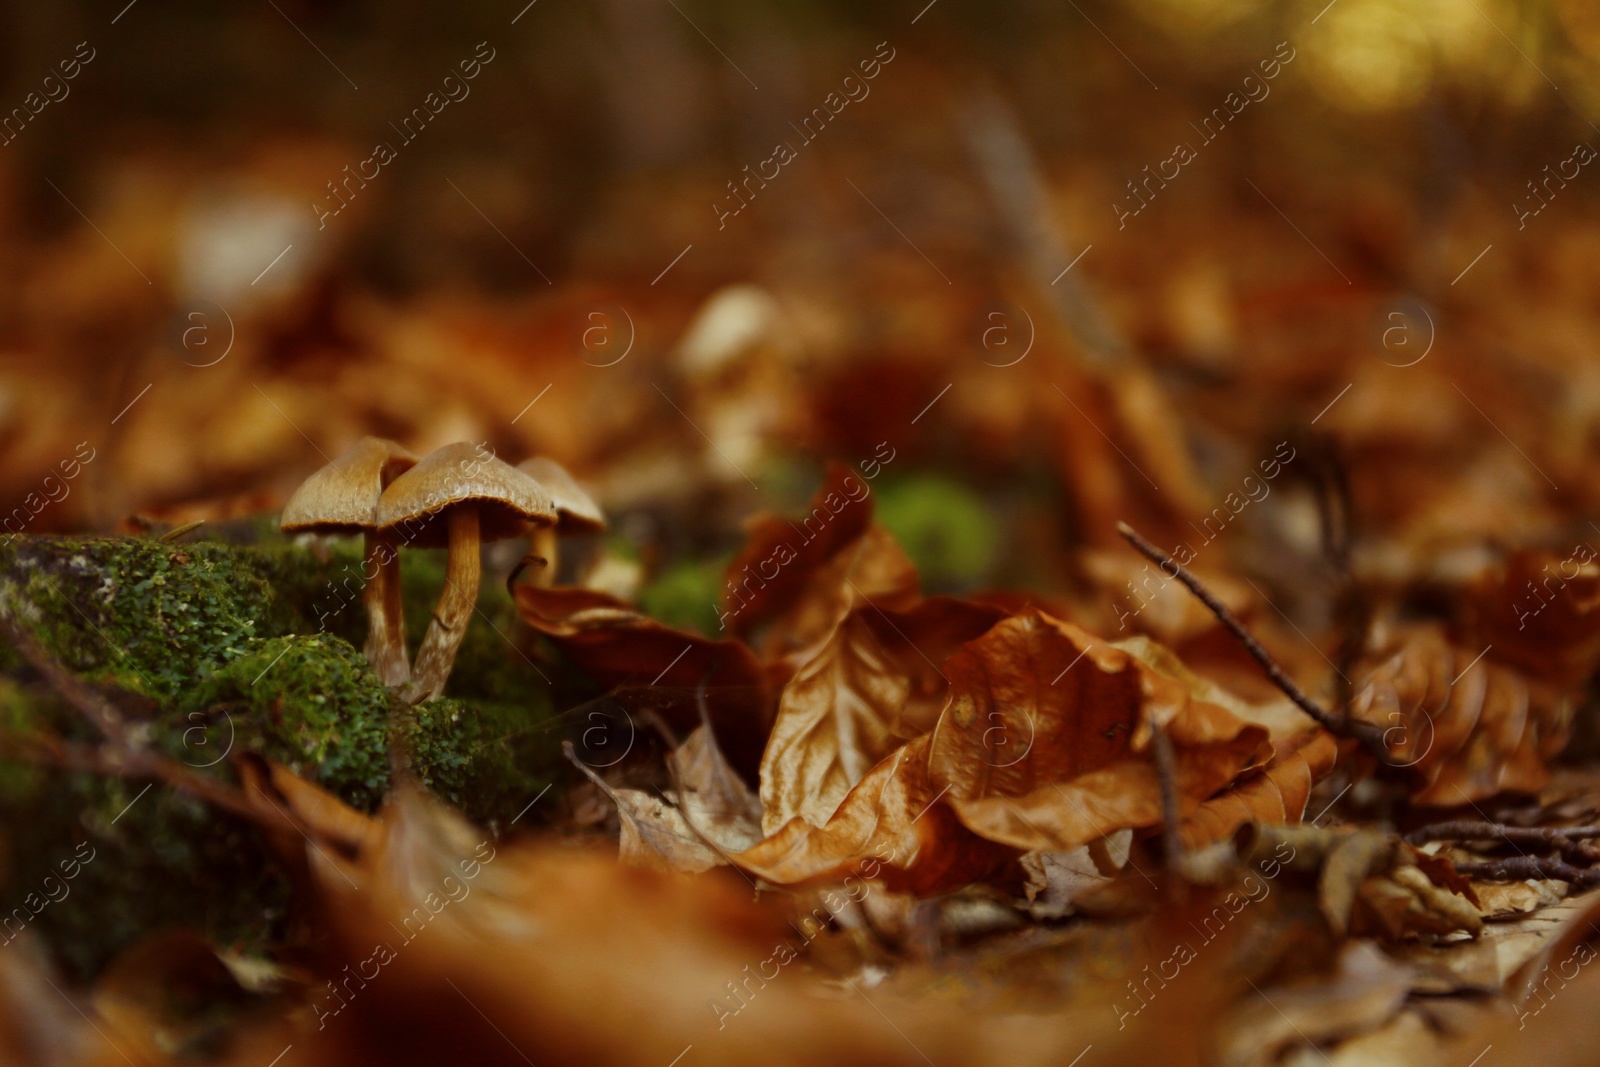 Photo of Mushrooms with fallen leaves on ground in forest. Space for text